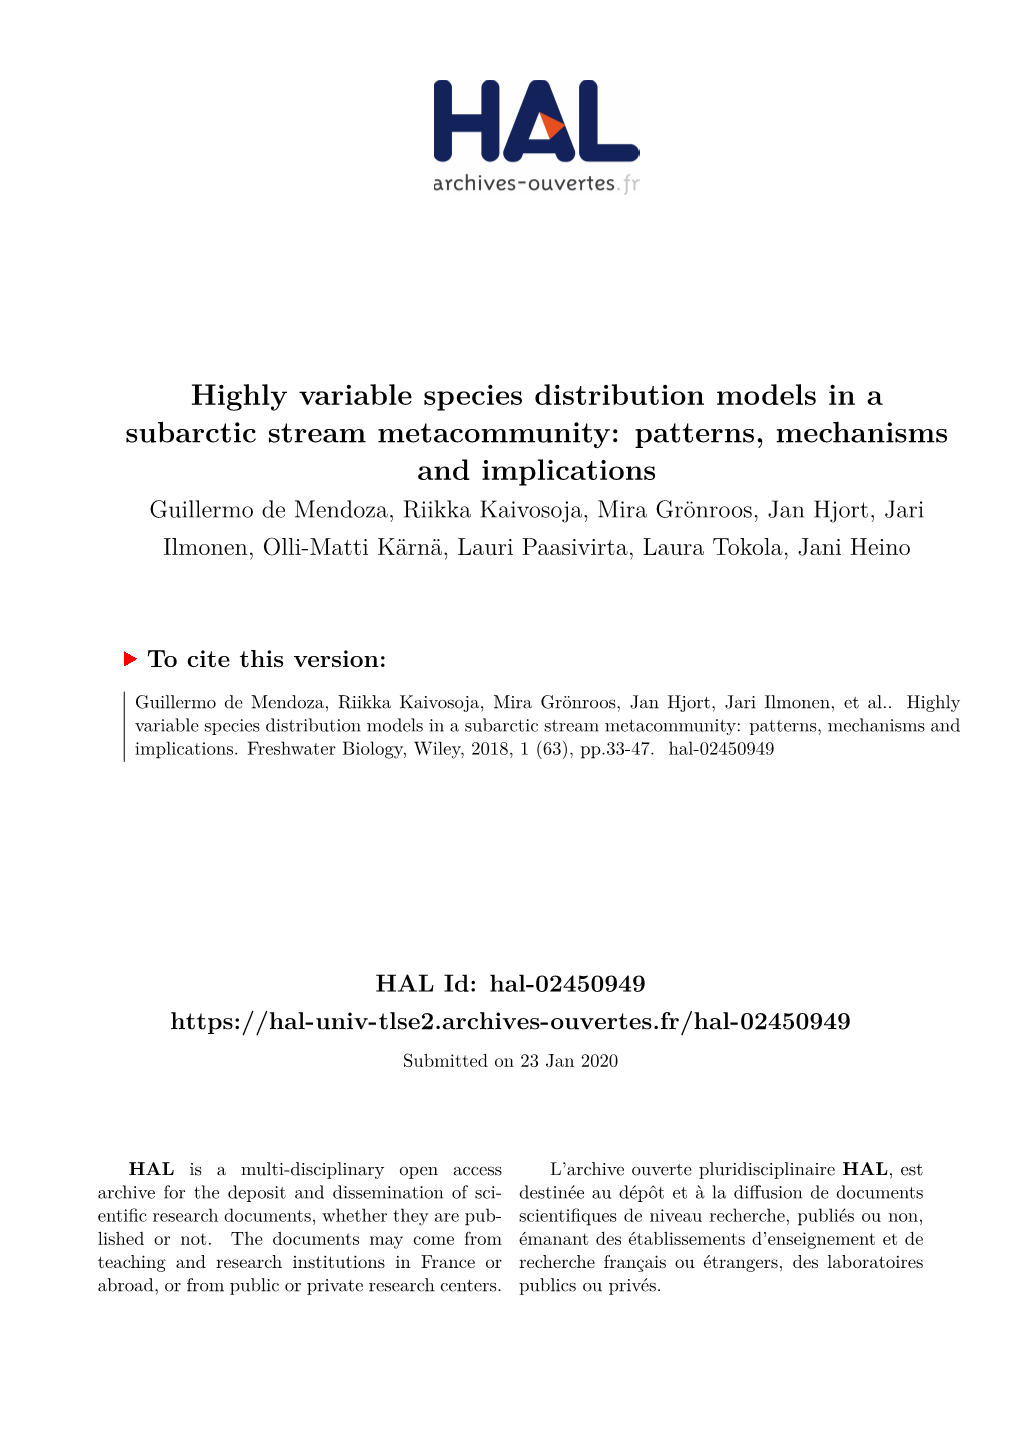 Highly Variable Species Distribution Models in a Subarctic Stream